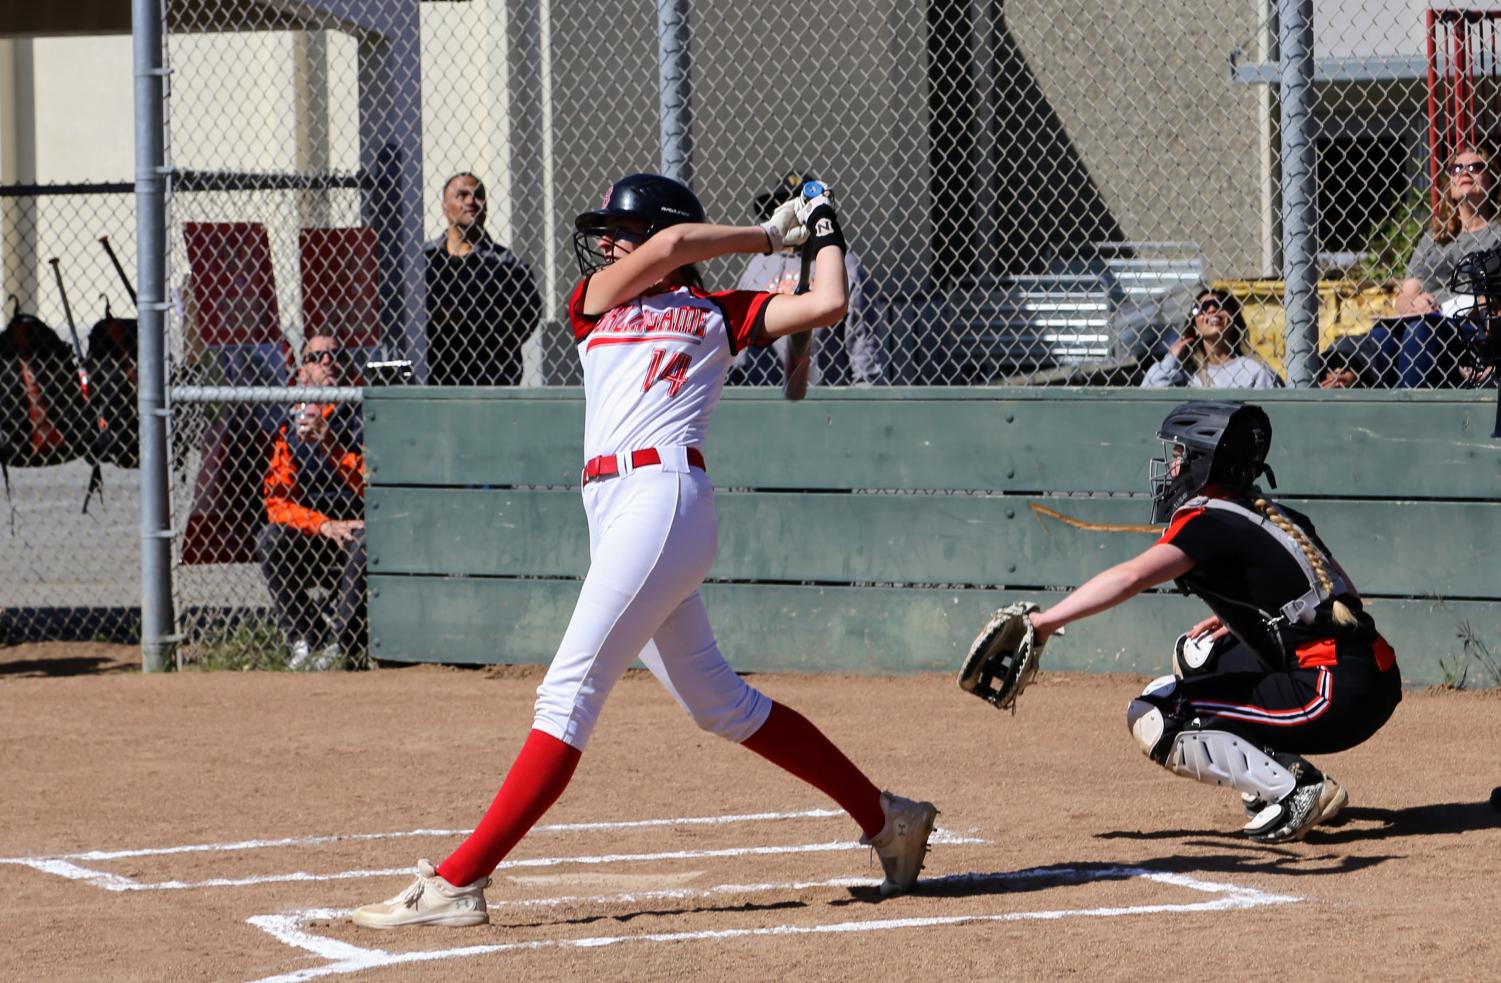 Varsity+softball+perseveres+through+league+play%2C+qualifies+for+CCS